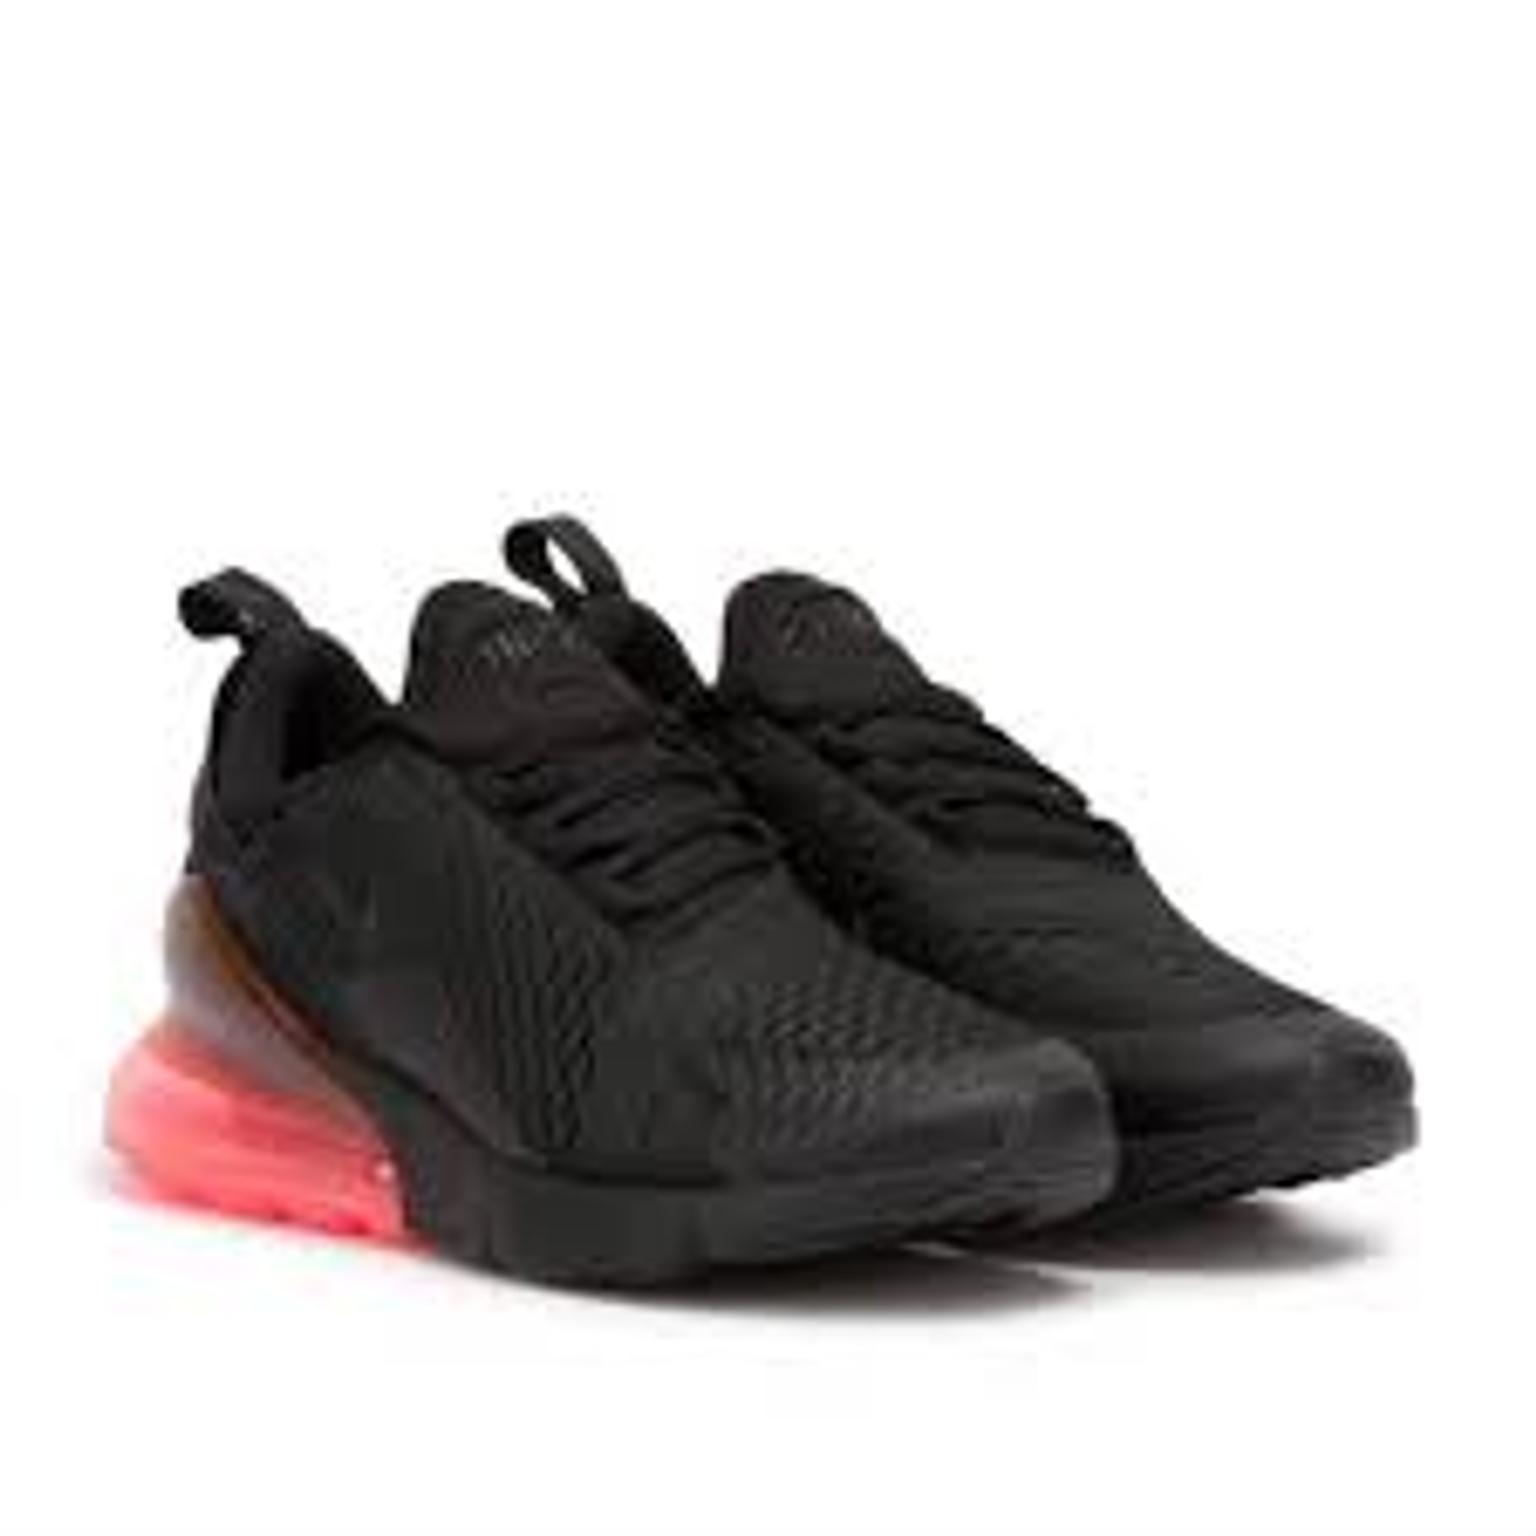 nike air max 270 youth size 5.5